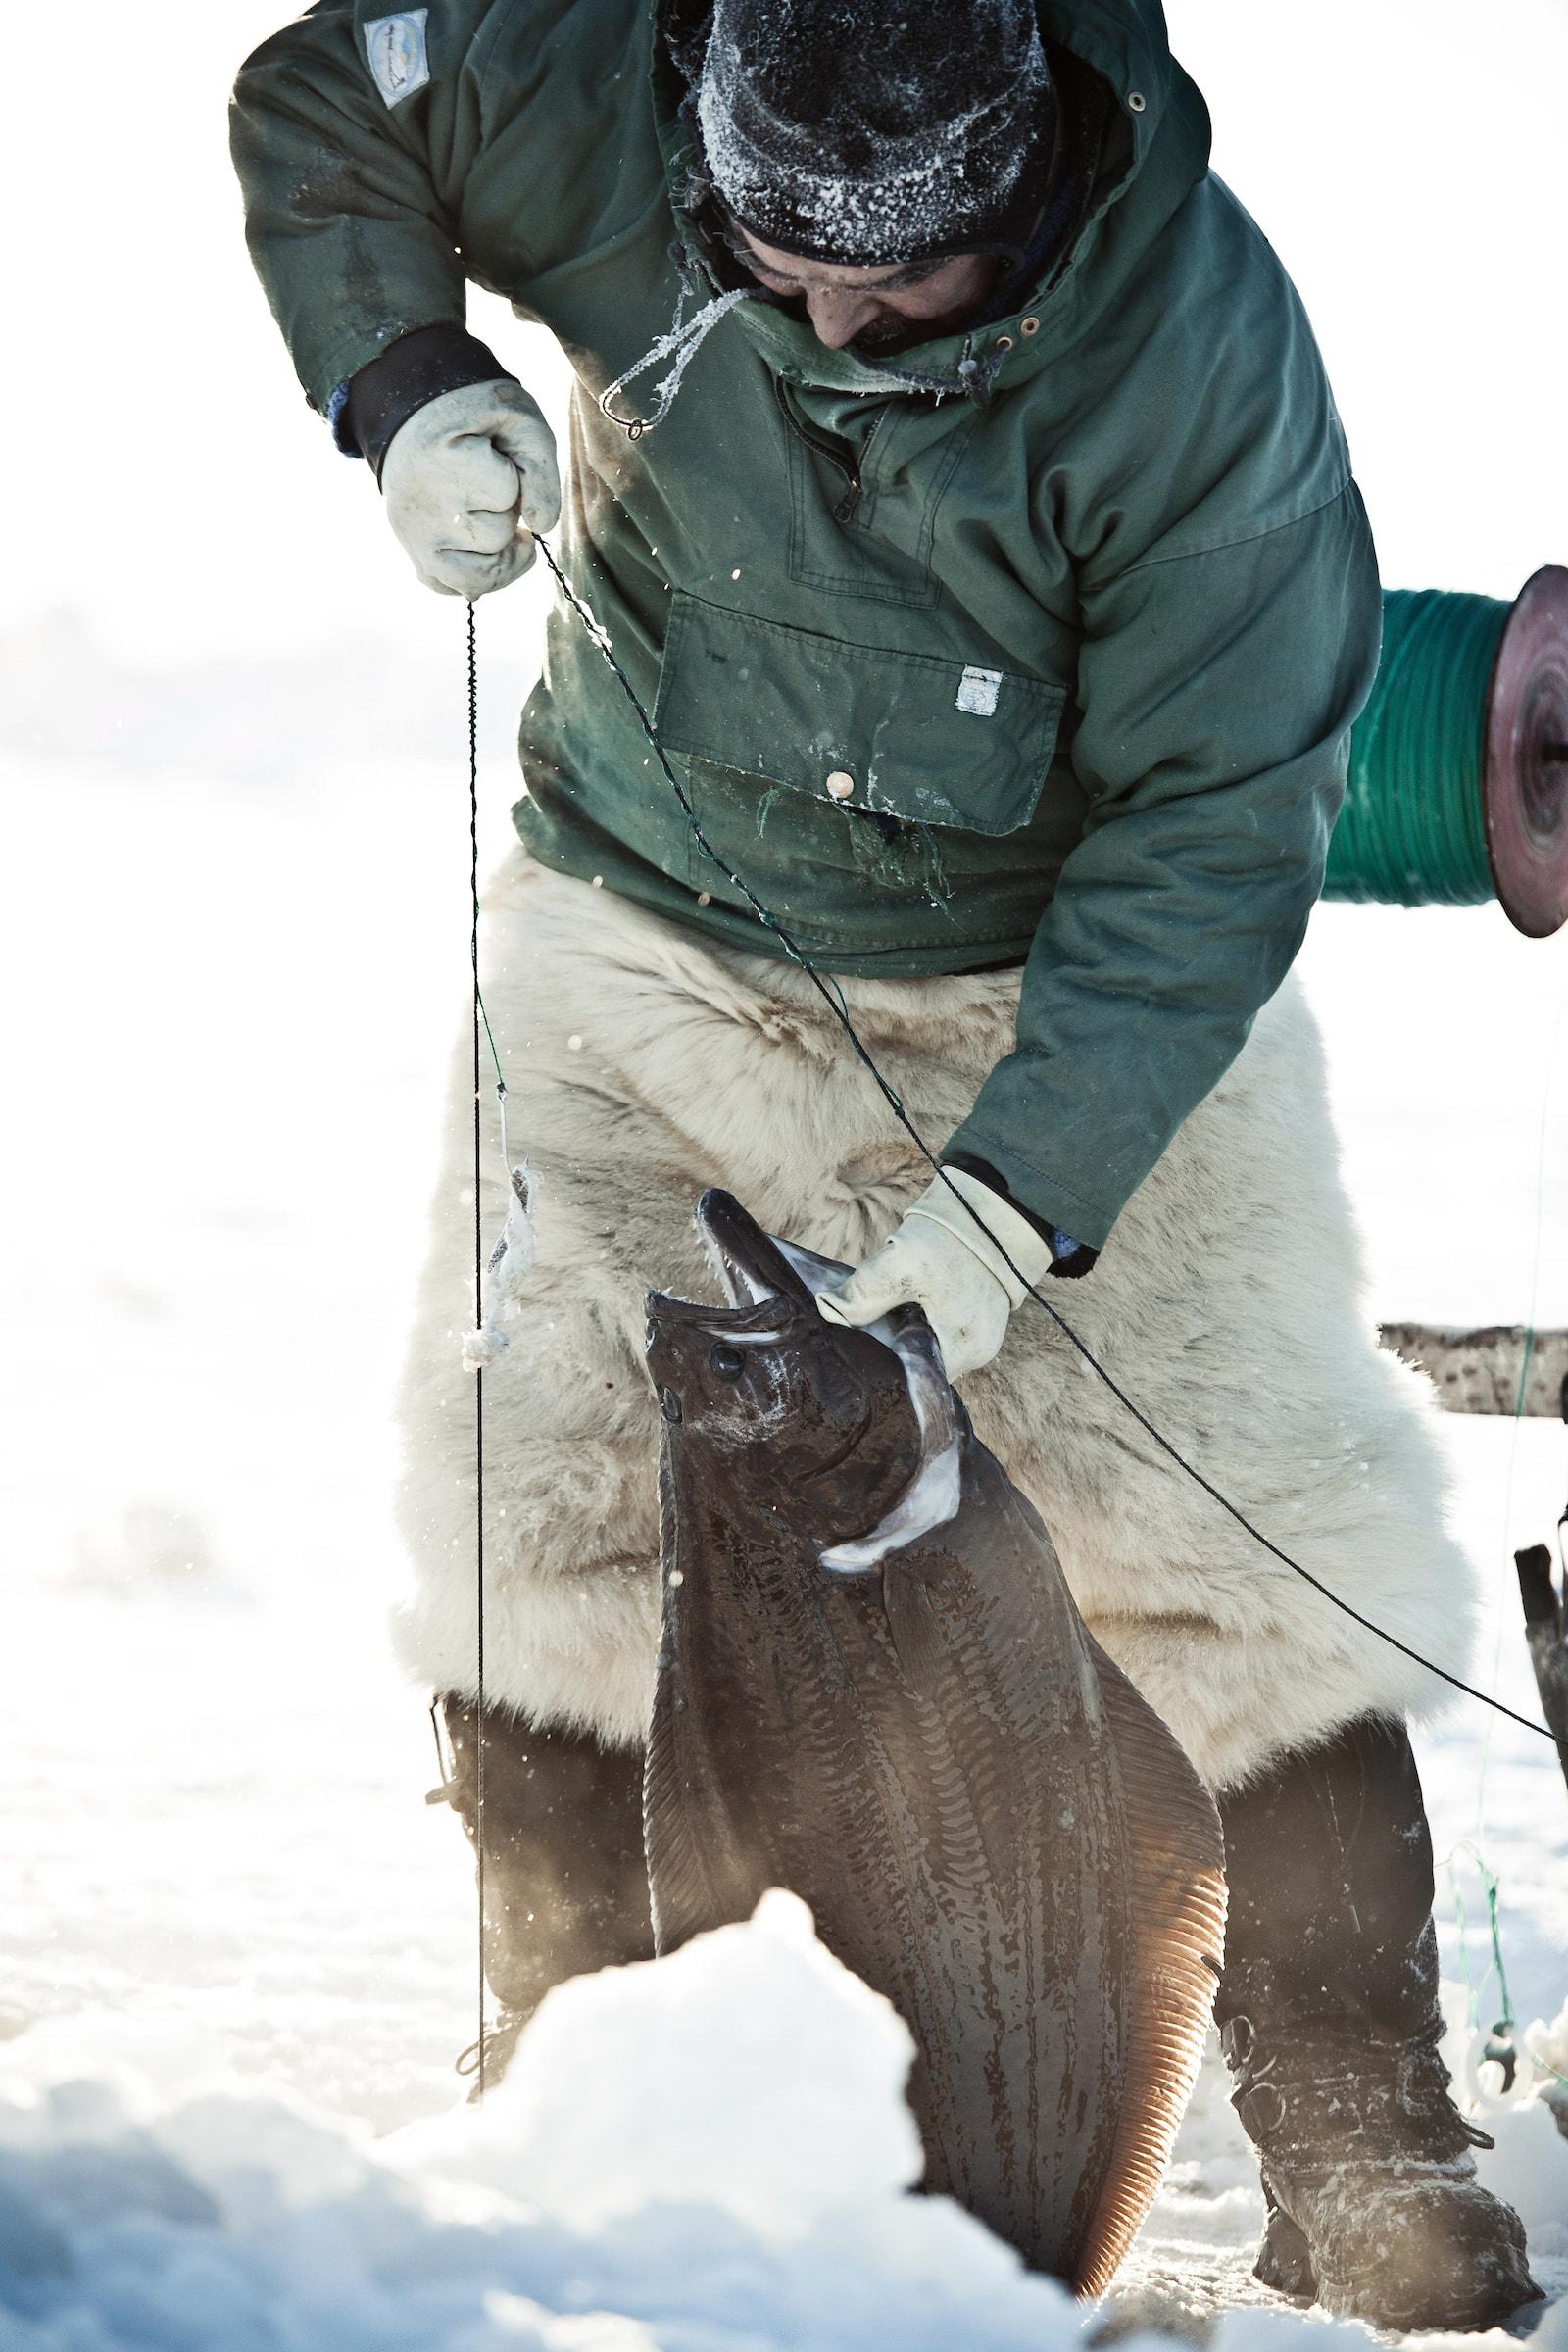 Fishing for halibut near Ilulissat in Greenland. Photo by André Schoenherr - Visit Greenland